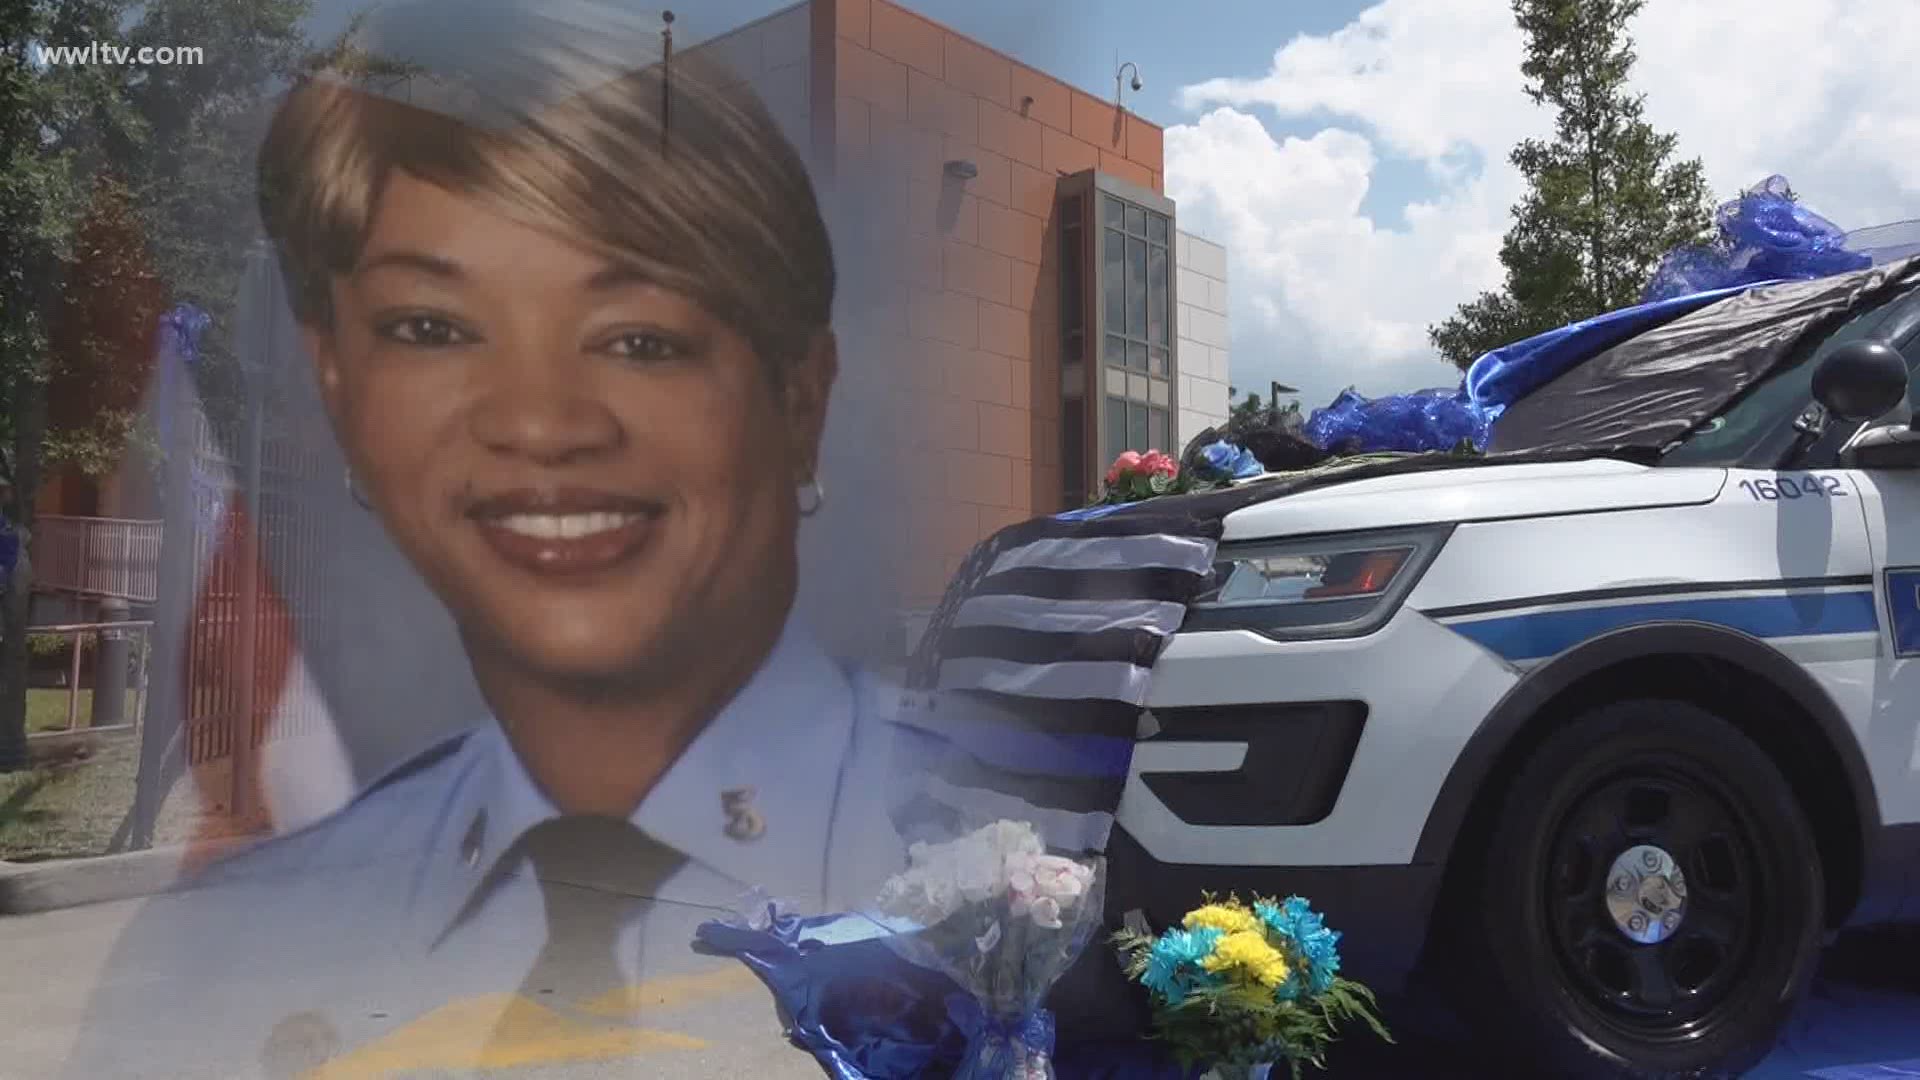 Sharon Williams, 54, a 30-year veteran of the New Orleans police force died a little more than a week ago of complications from COVID-19.